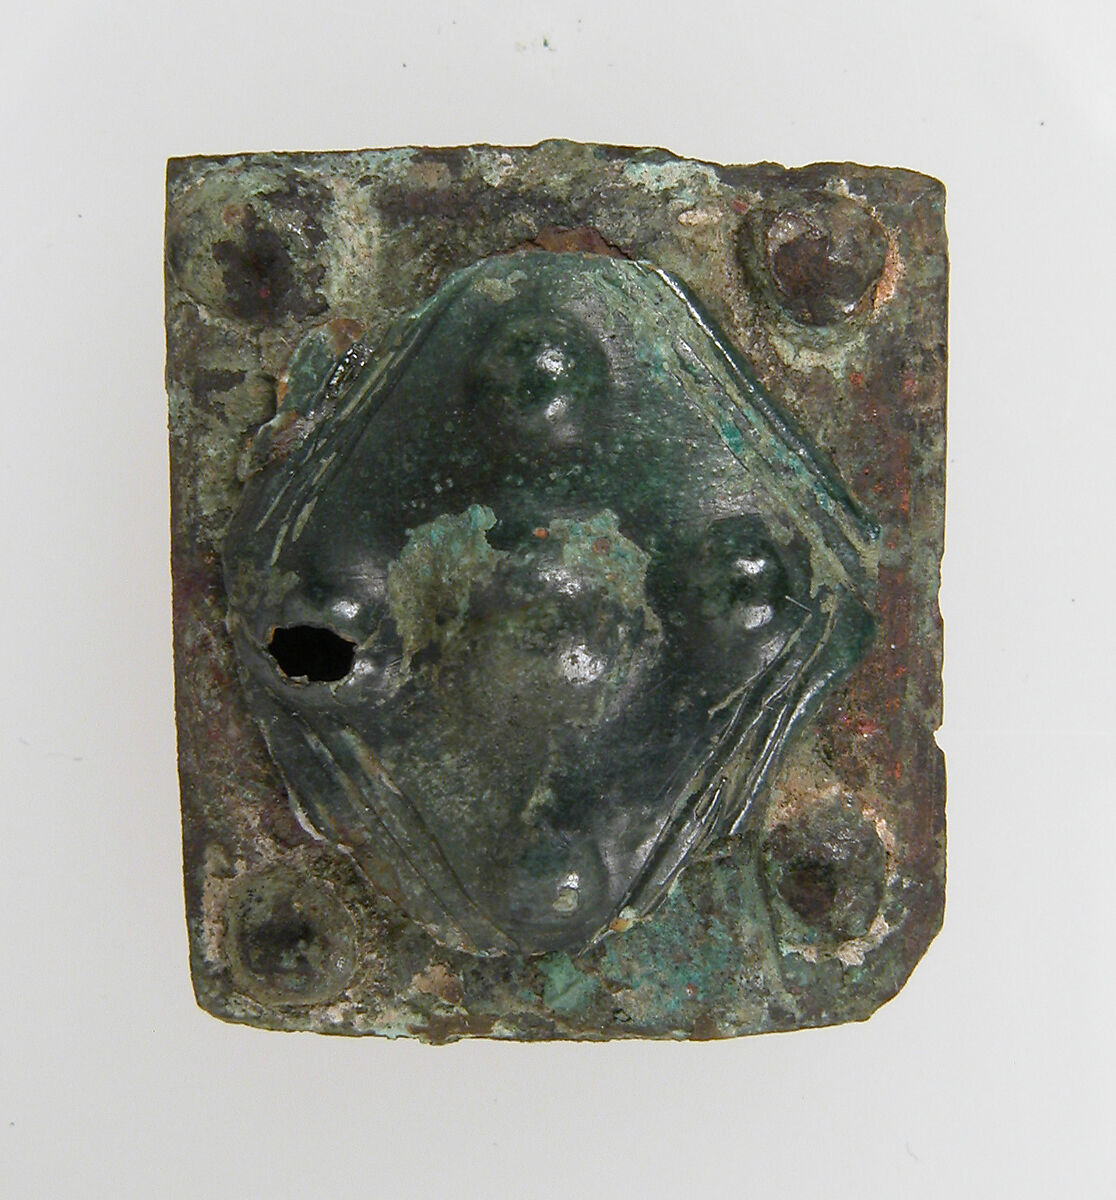 Plate from Belt Buckle, Copper alloy, Frankish 